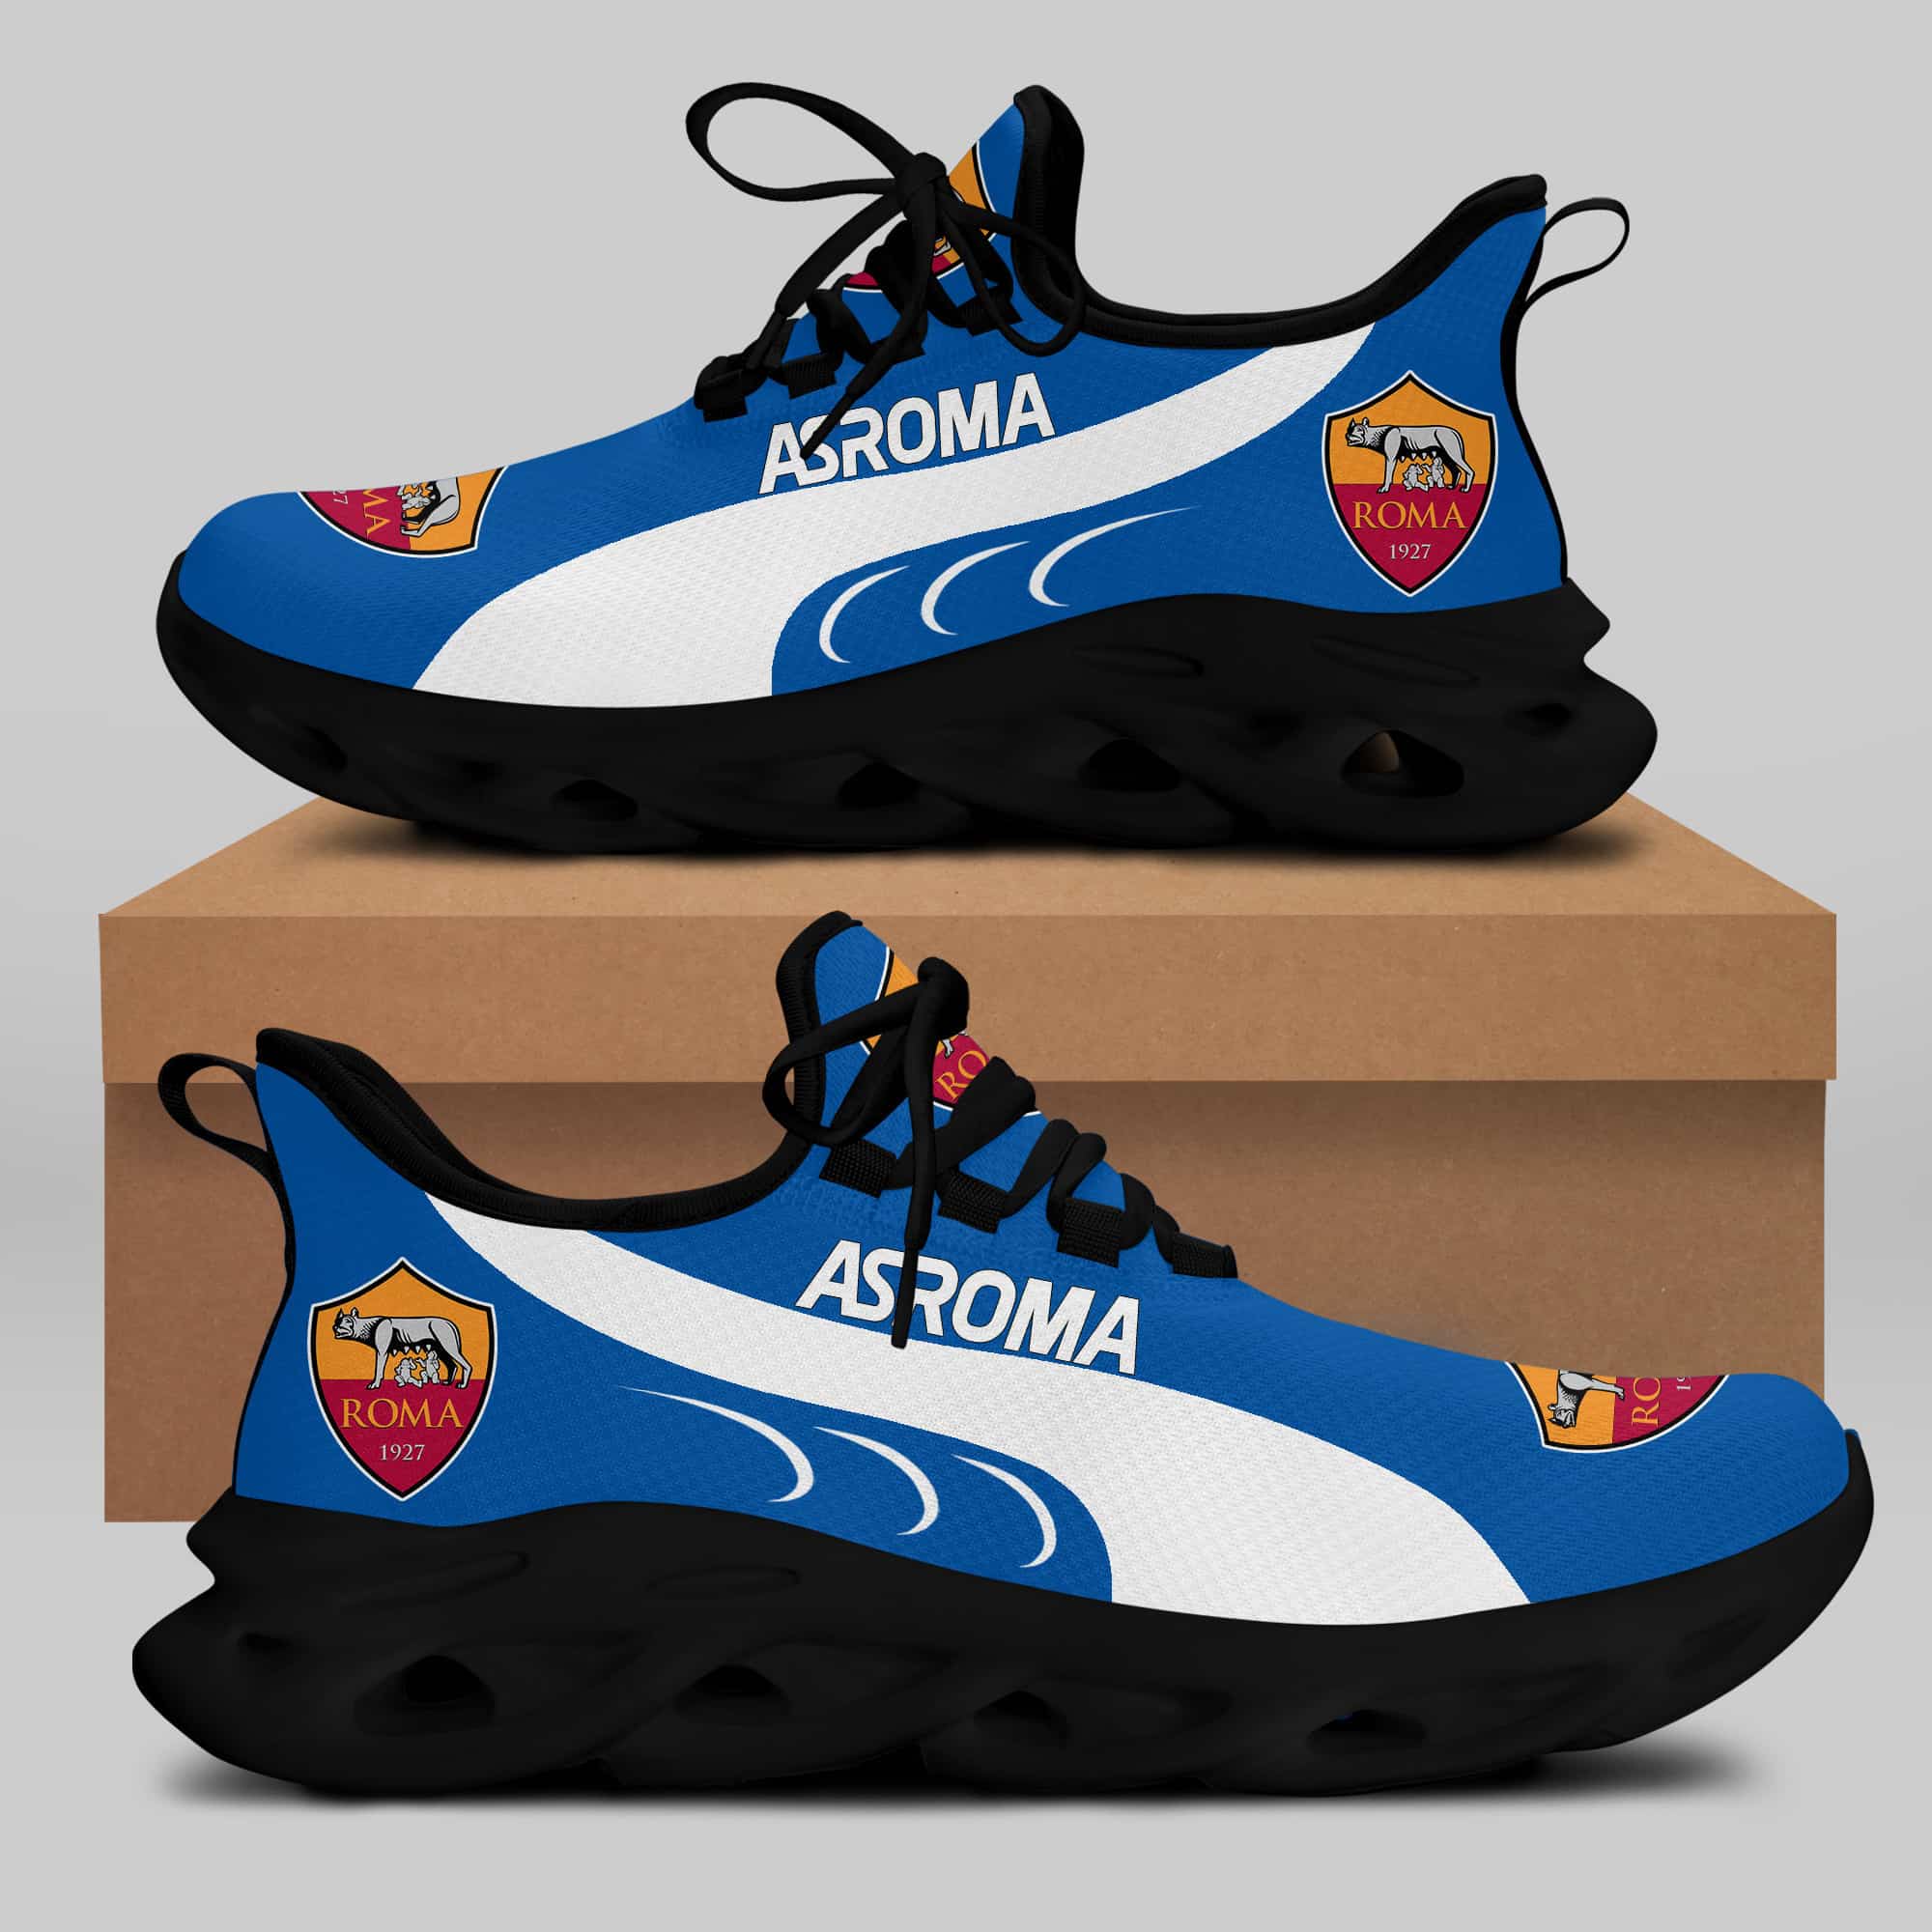 As Roma Running Shoes Max Soul Shoes Sneakers Ver 6 2